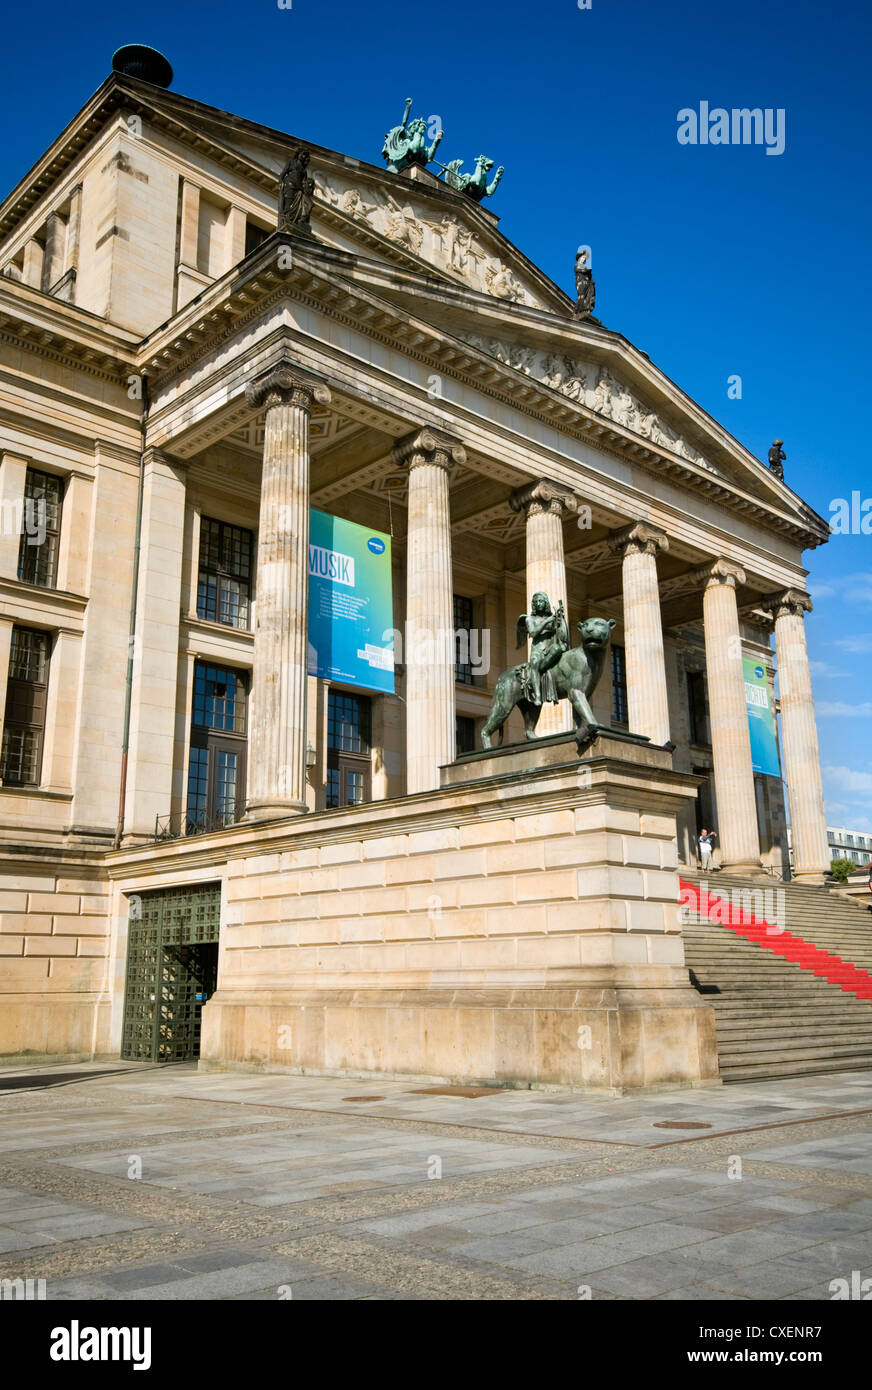 Exterior of the Konzerthaus concert hall situated on the Gendarmenmarkt in Berlin, Germany Stock Photo